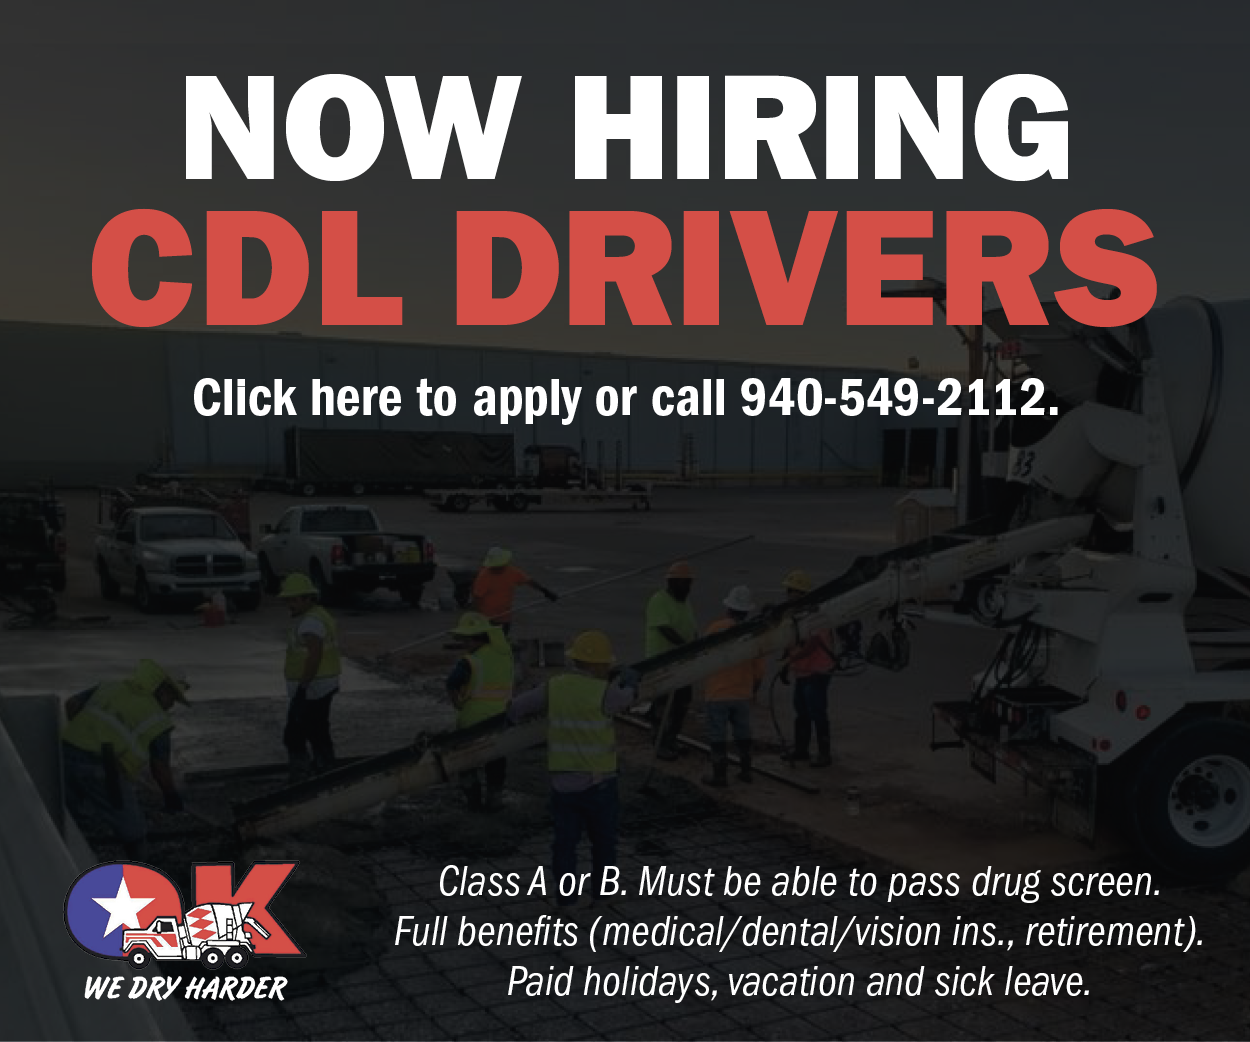 Help Wanted Ad for CDL Drivers